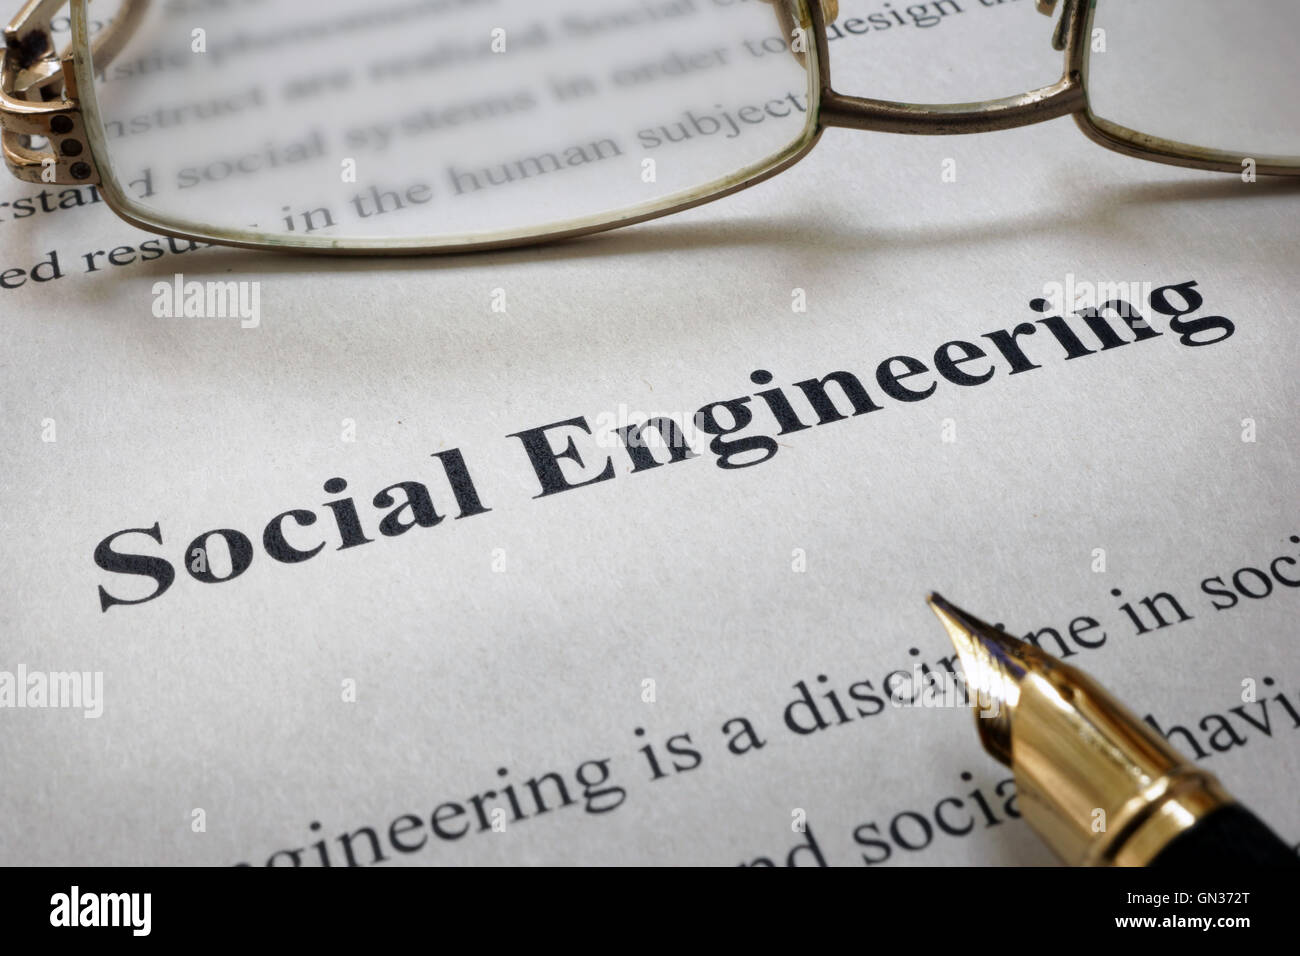 Page of paper with words Social Engineering and glasses. Stock Photo